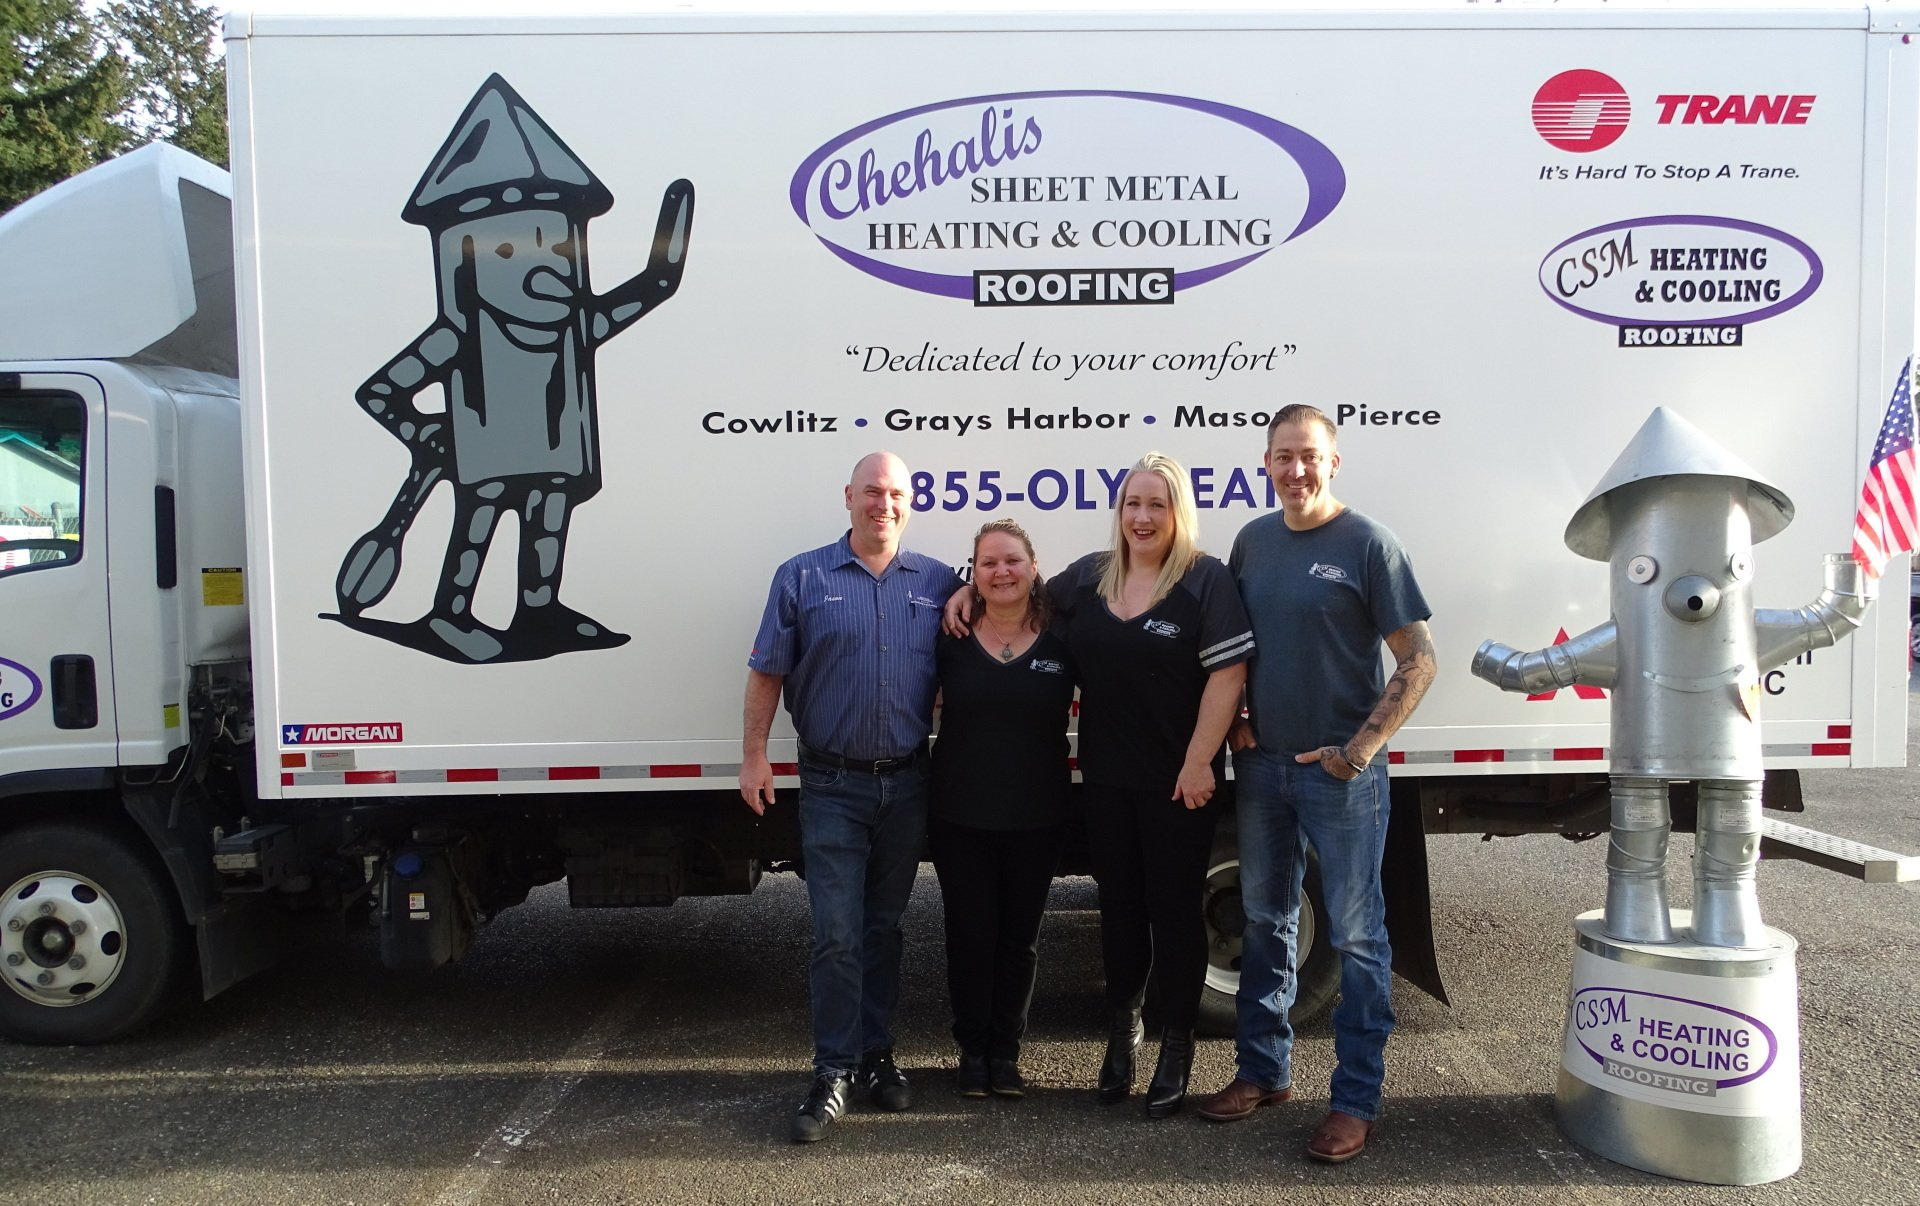 Chehalis Heating, Cooling & Roofing